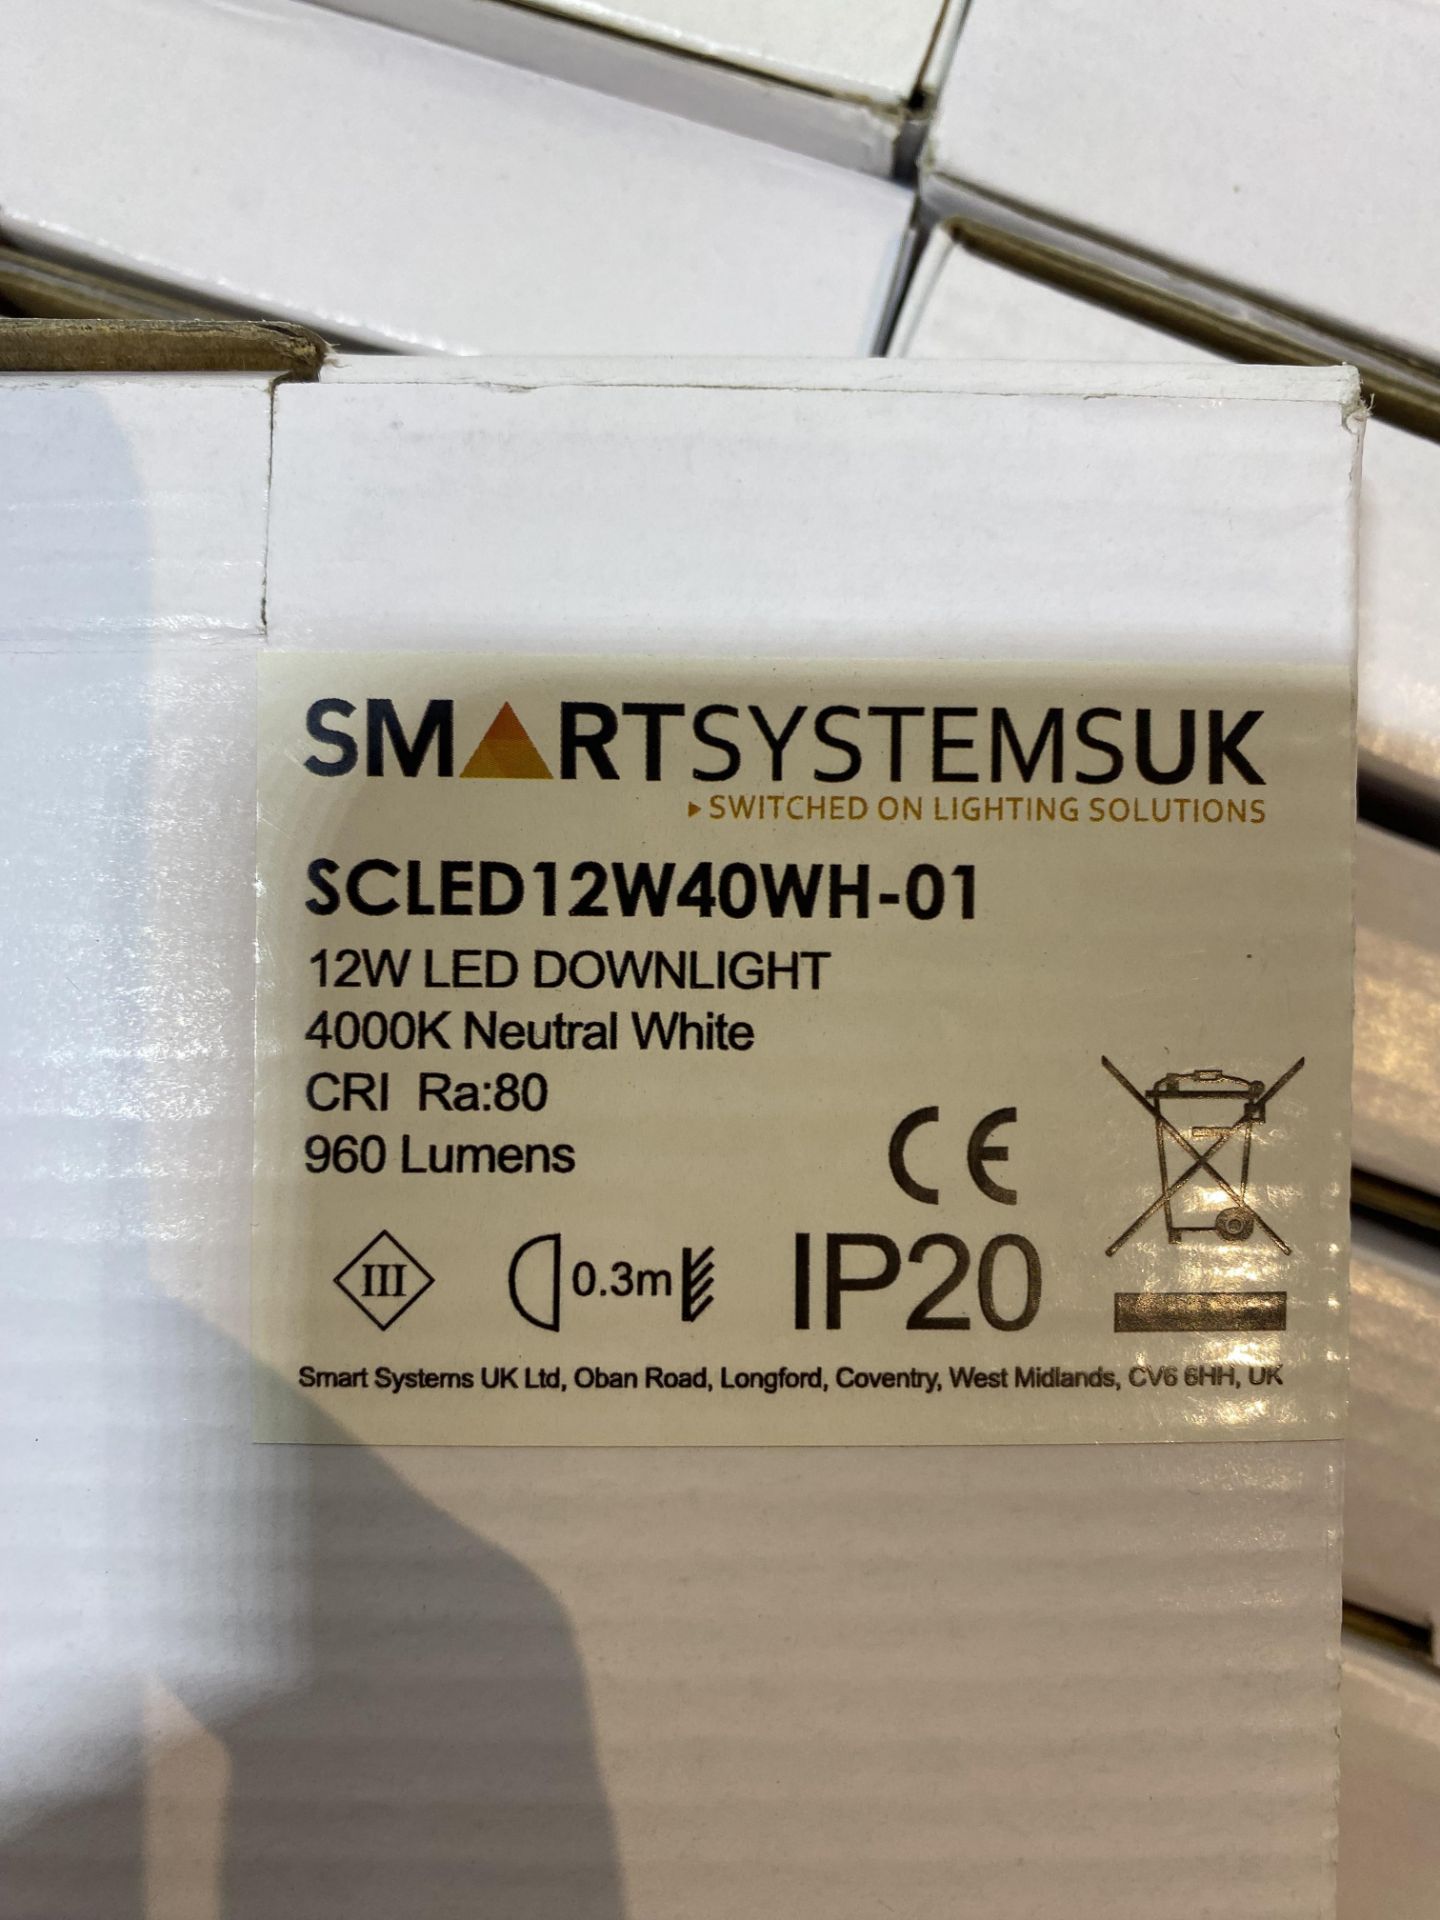 70 x Various Smartsystemuk White LED Downlights - See Description - Image 5 of 6